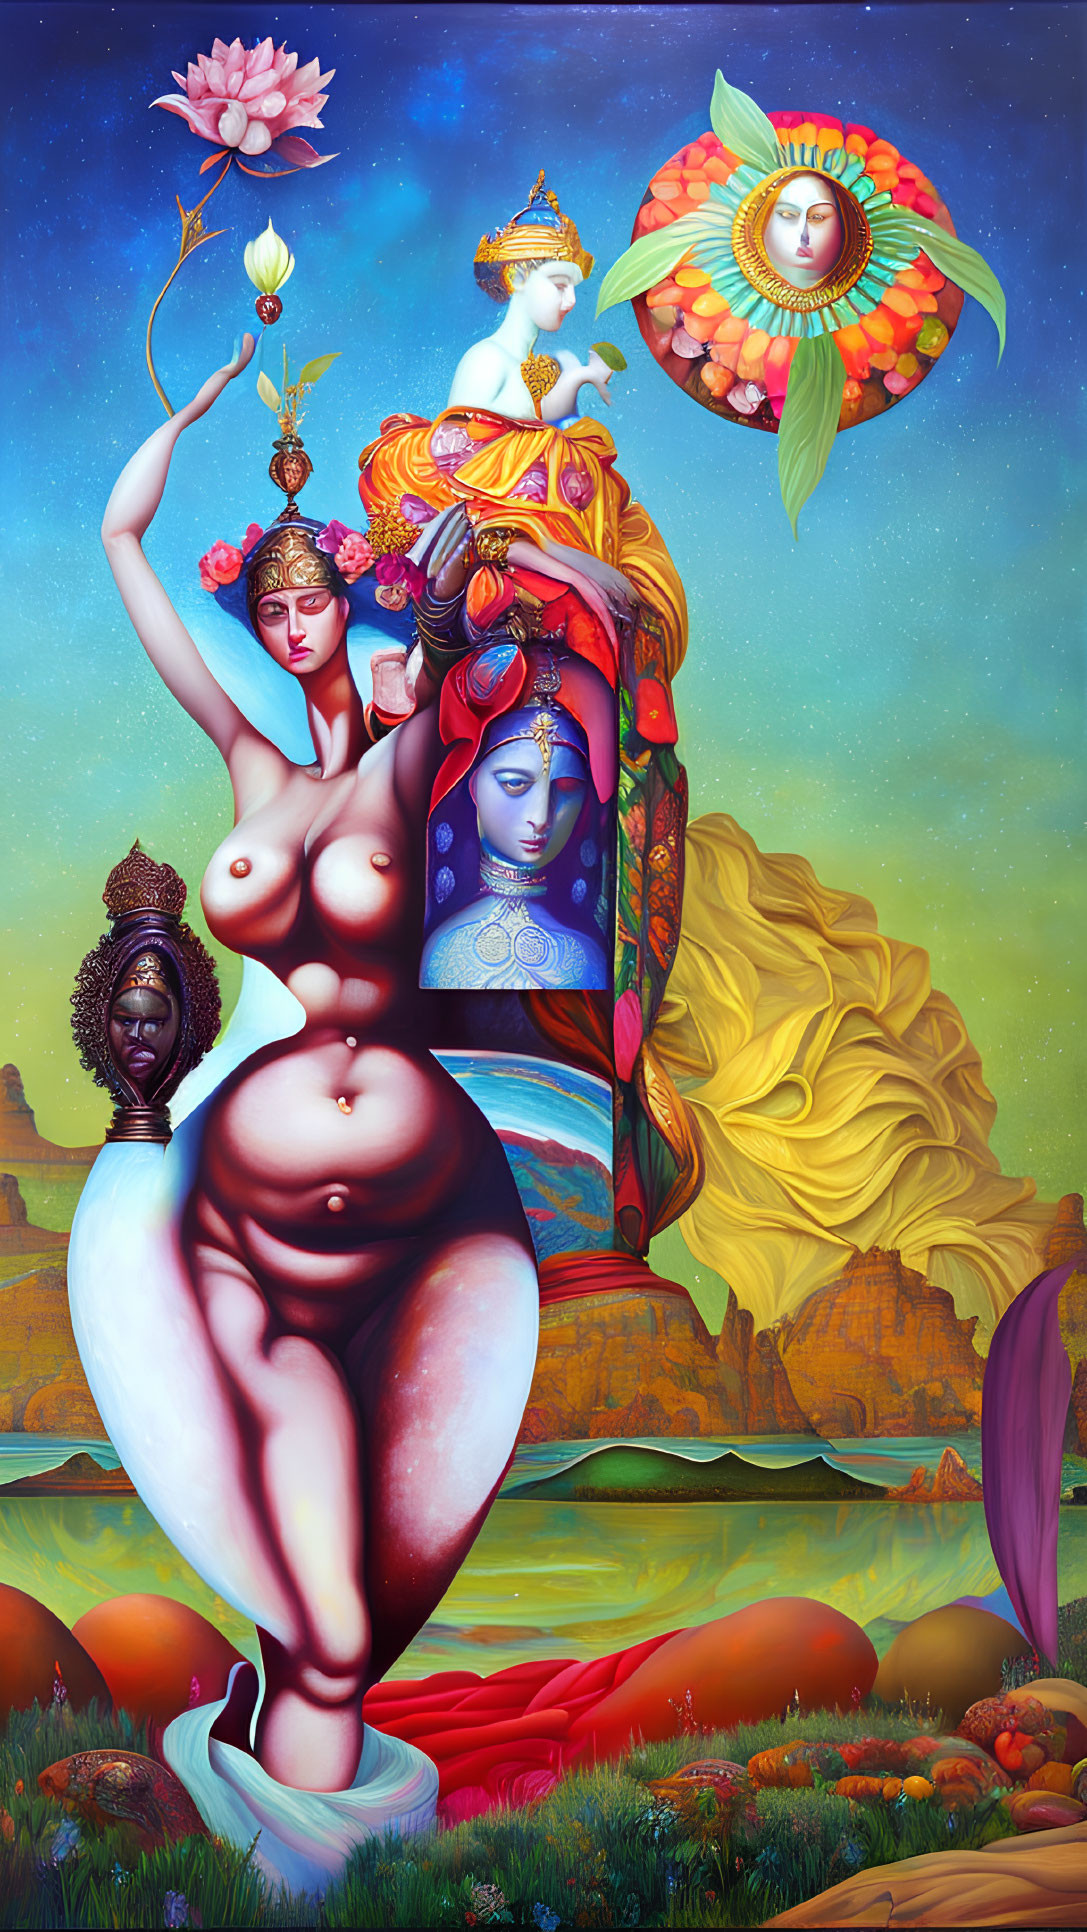 Surreal painting of woman with multiple arms and symbolic items in mythological setting